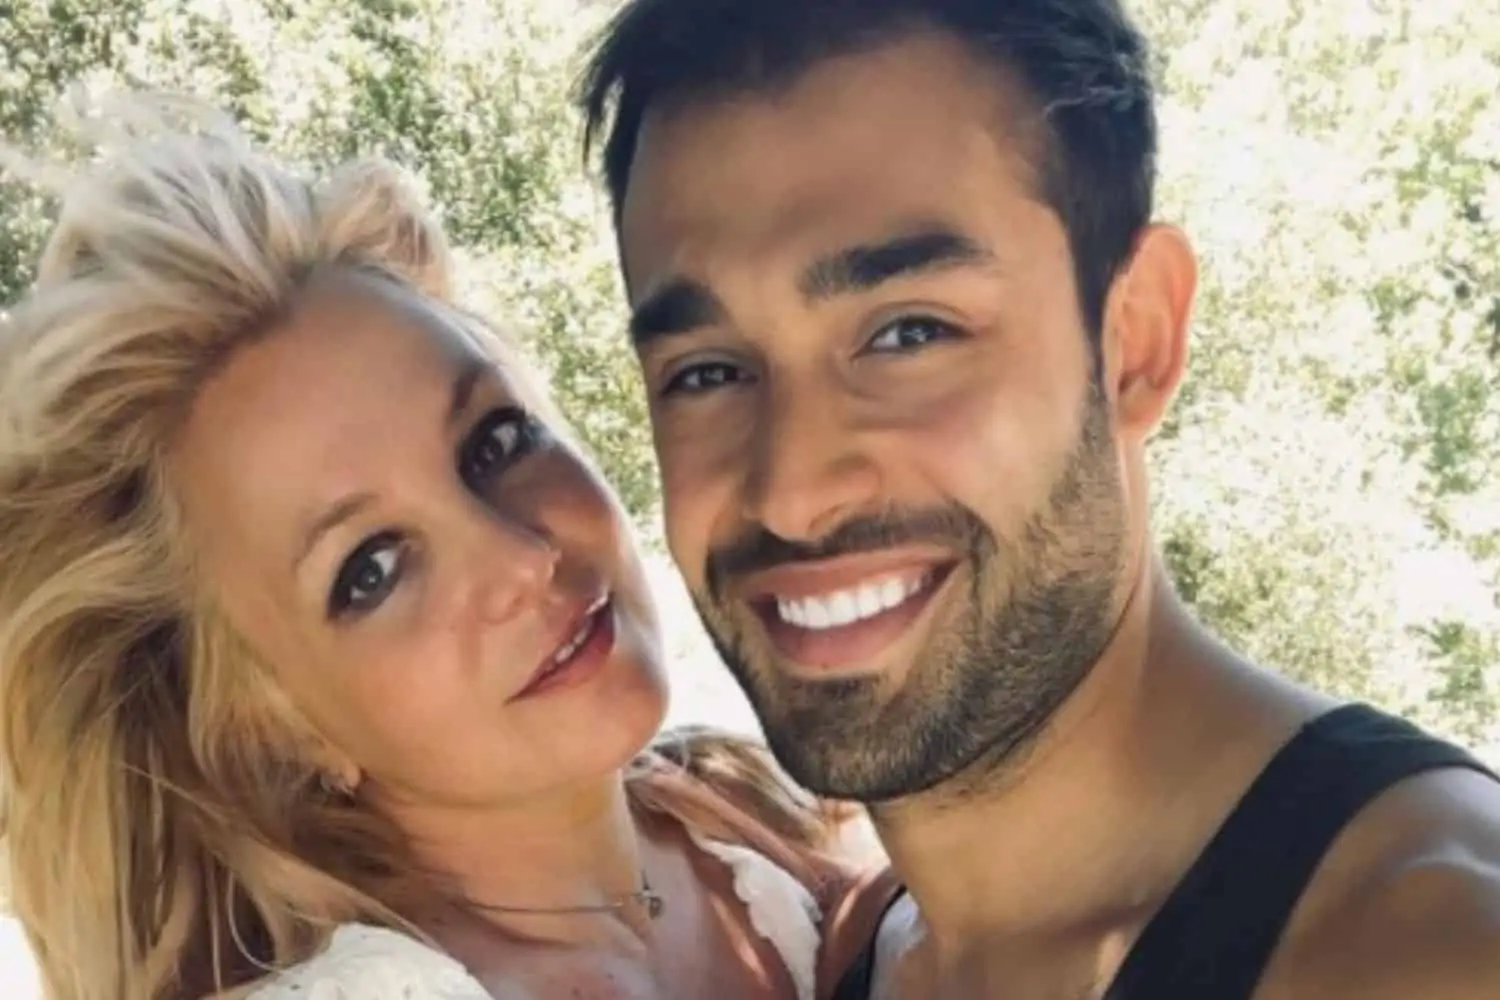 Is Britney Spears pregnant? - The author of "Being Britney" won't be surprised